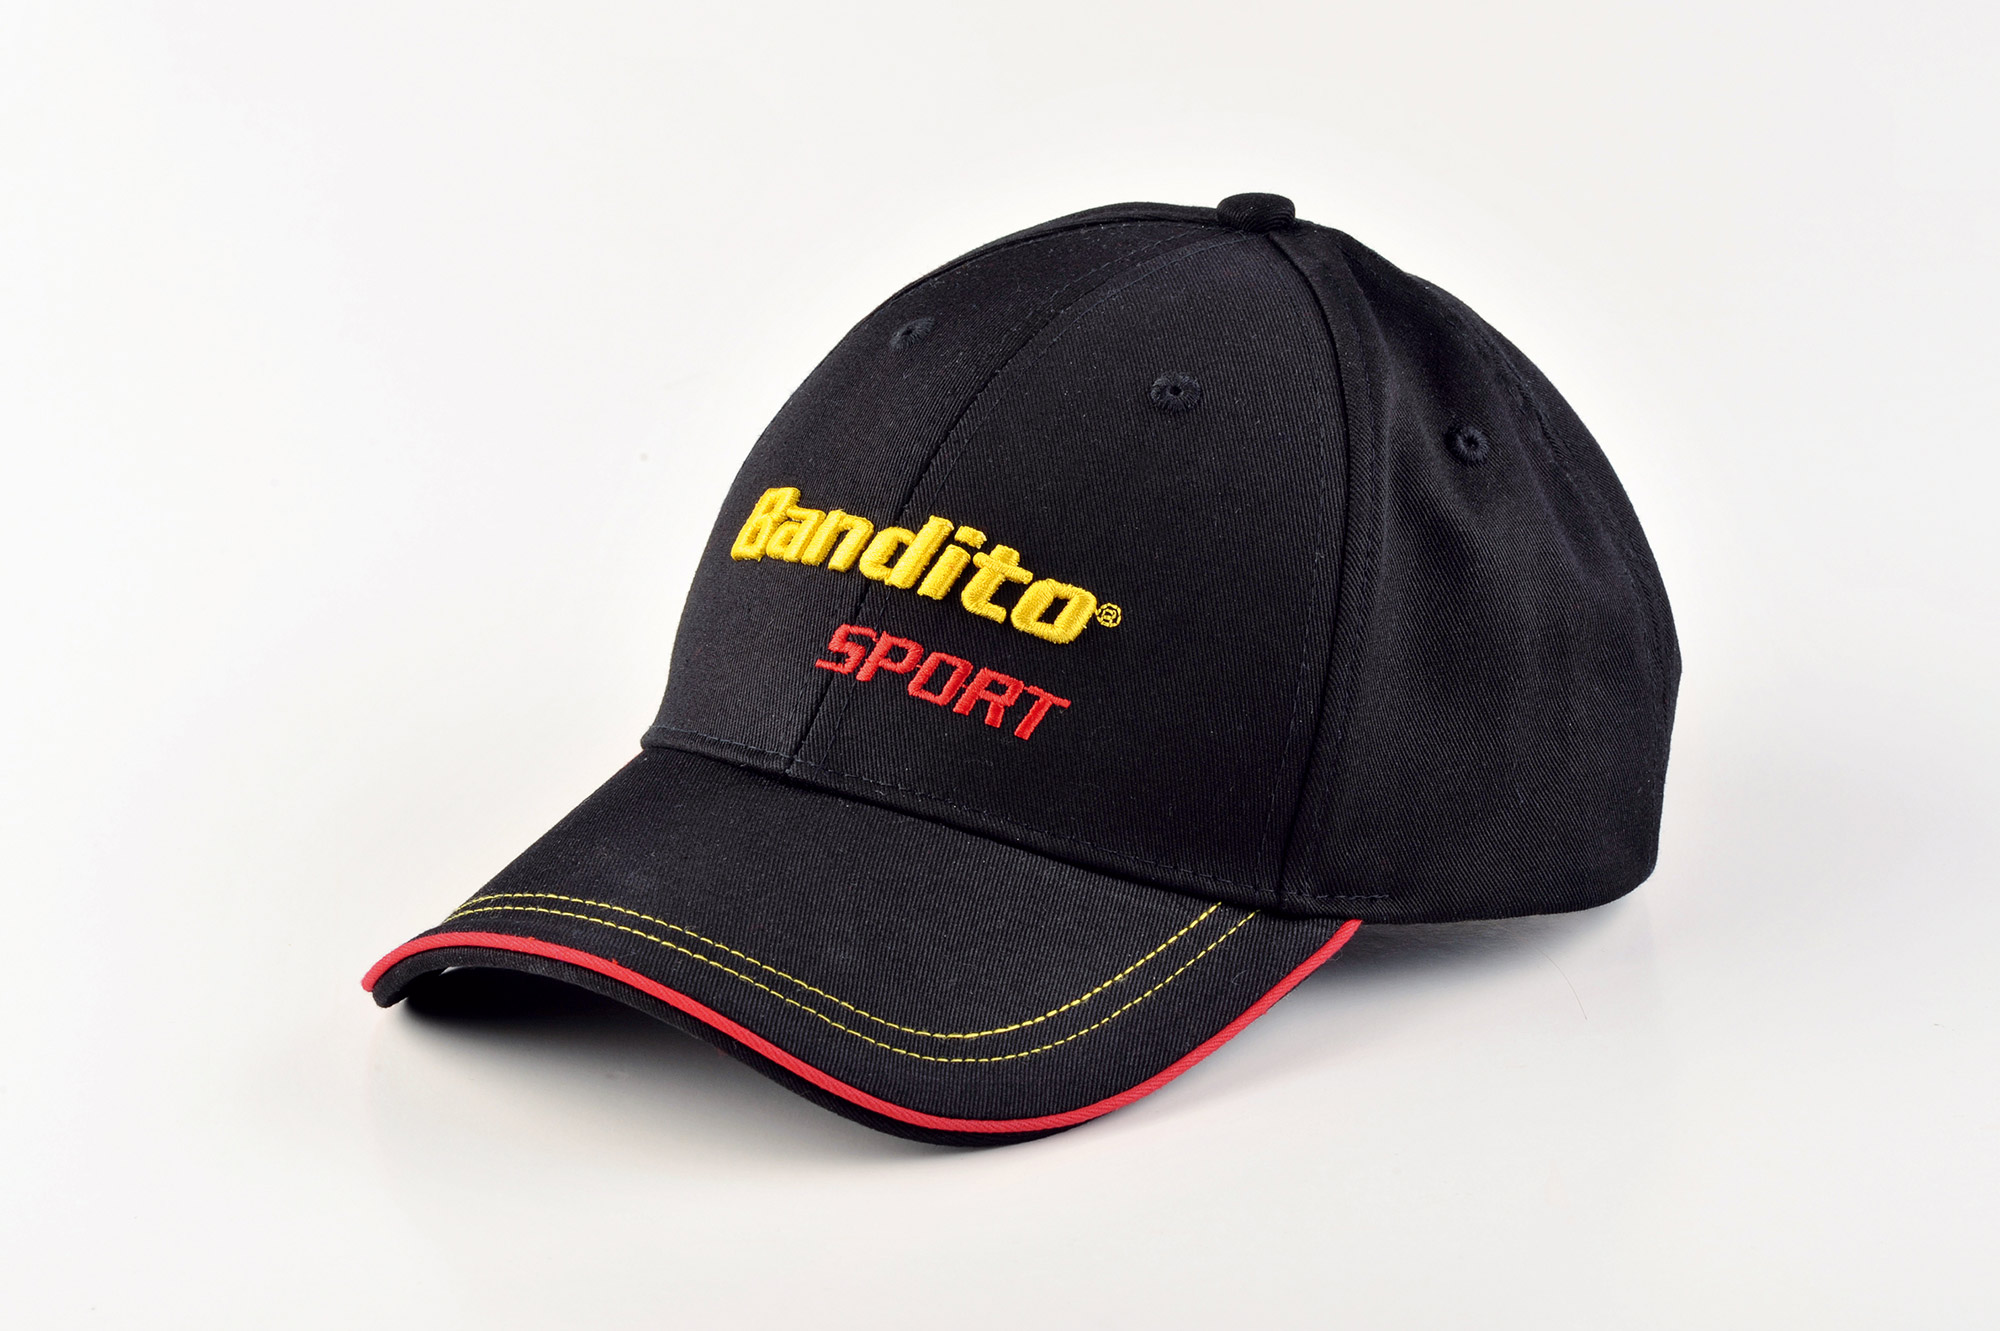 Basecap with Bandito lettering